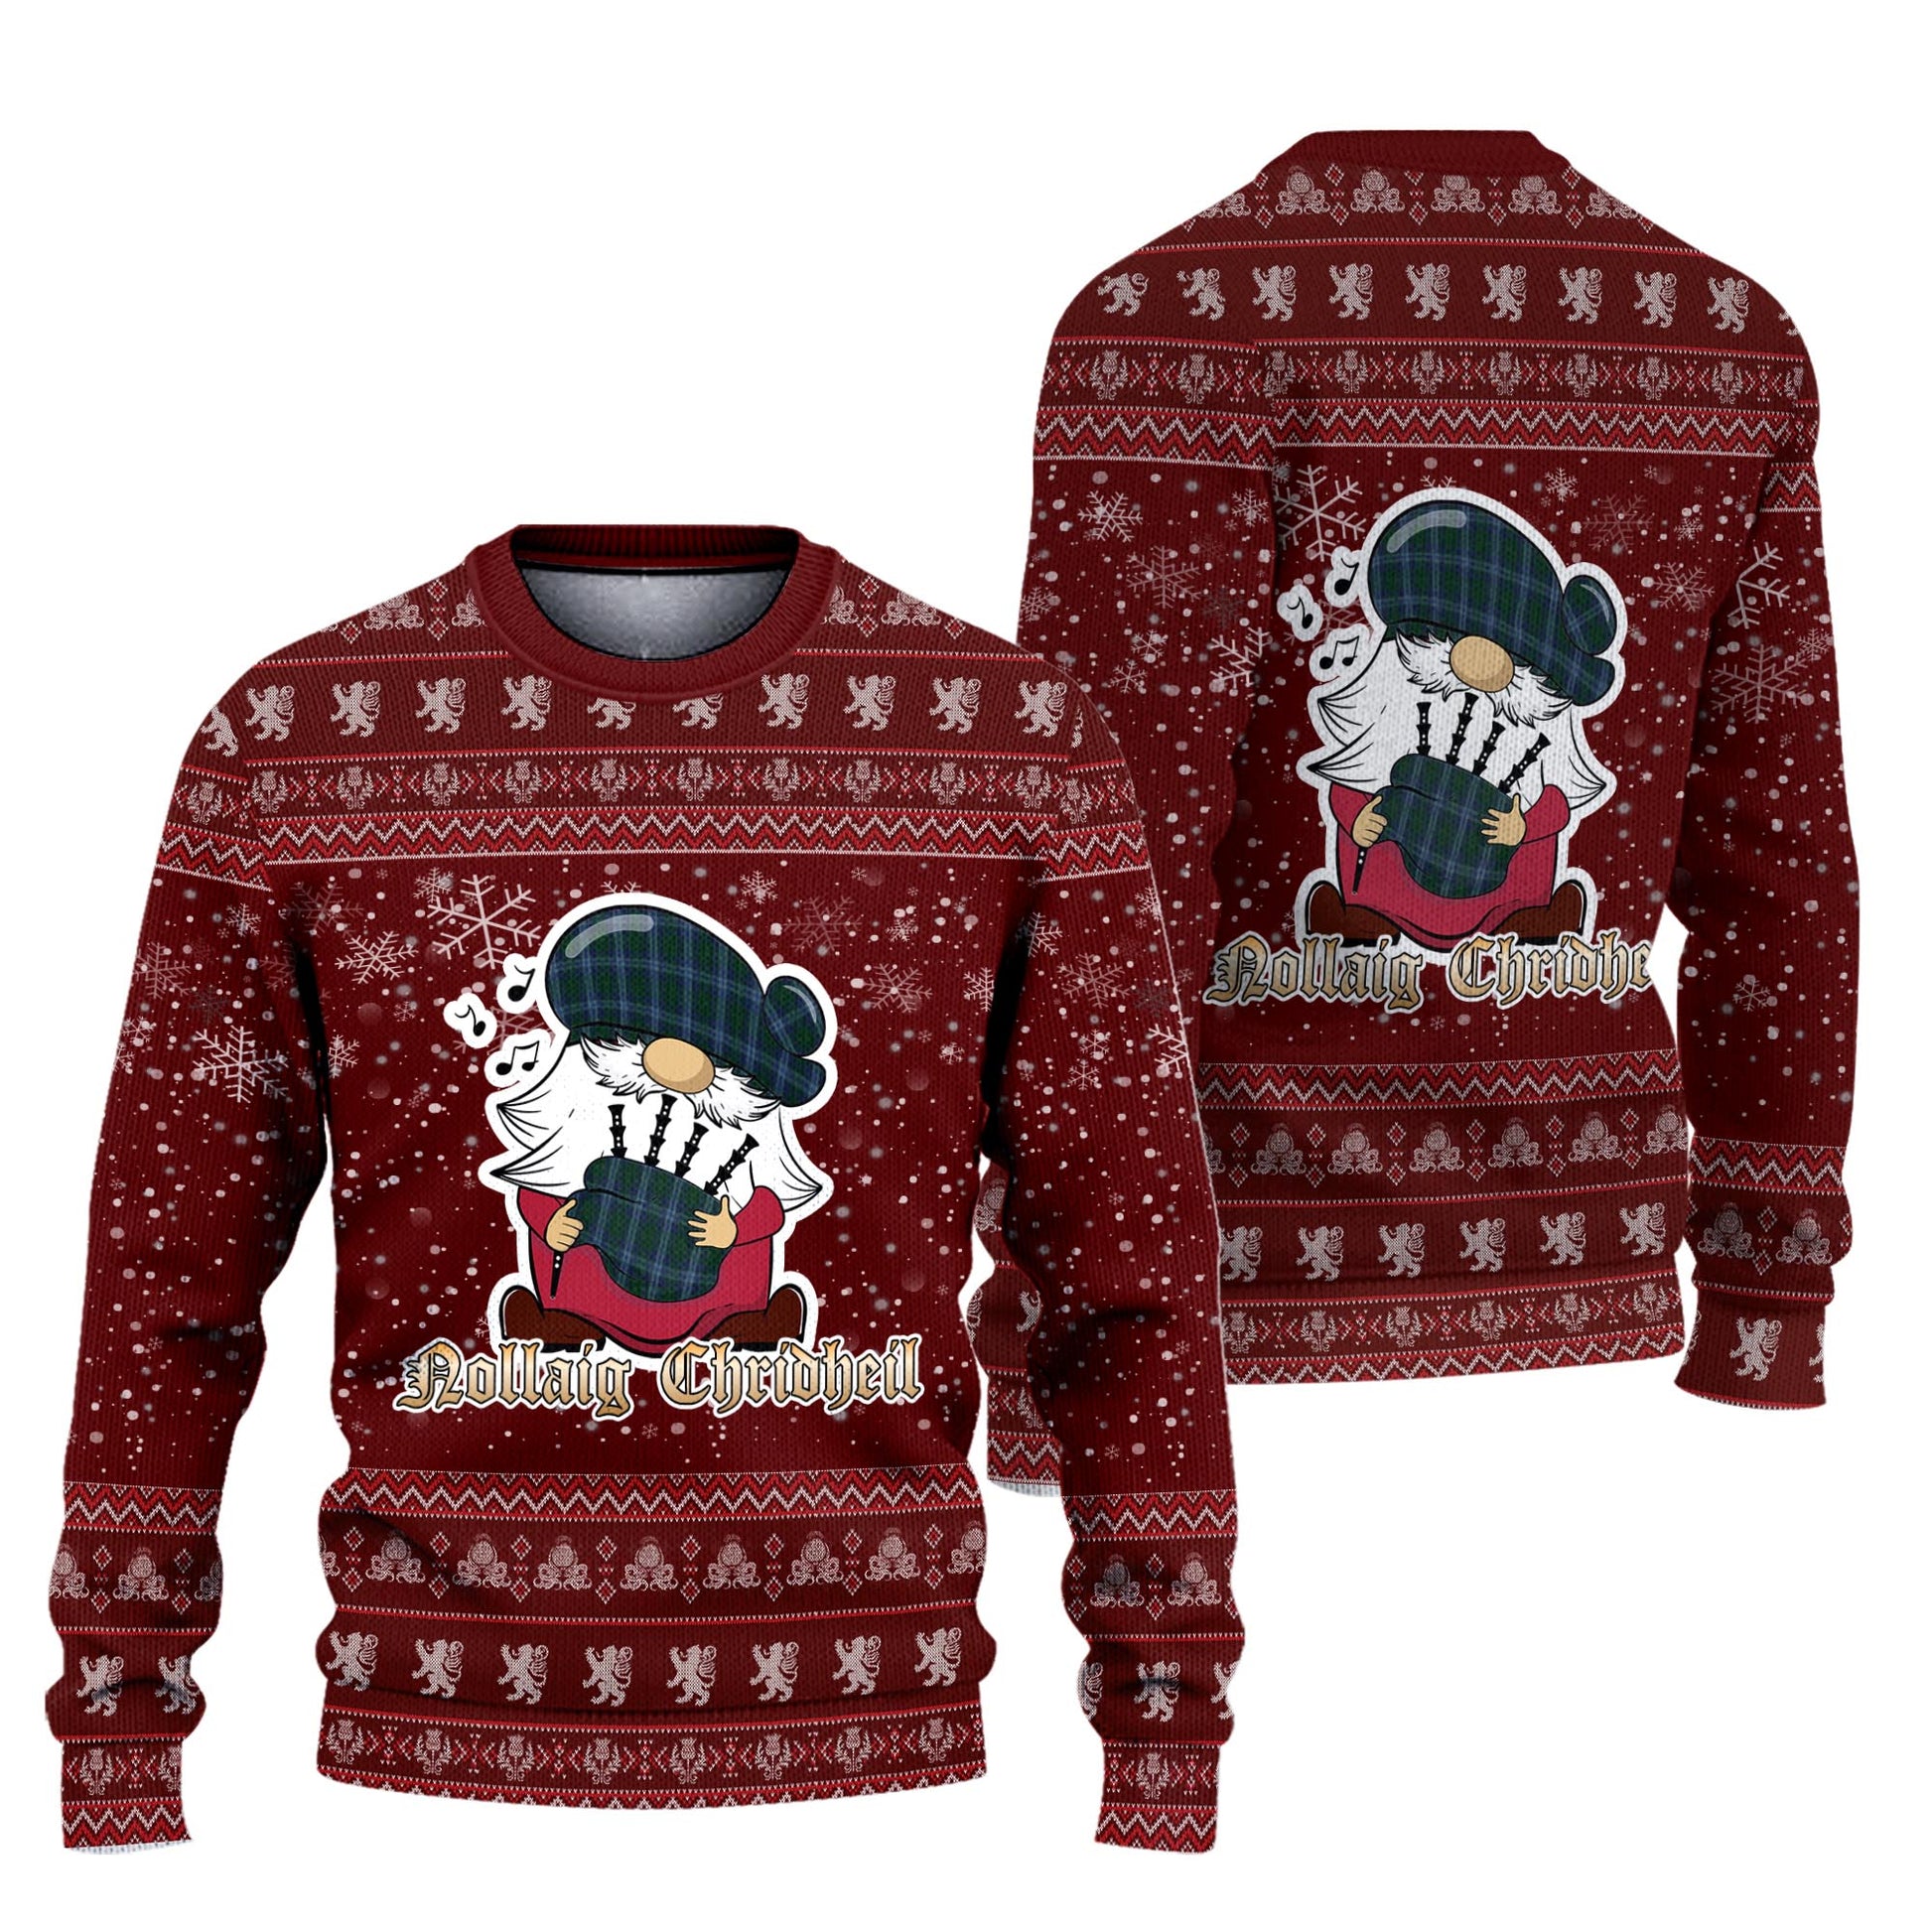 Jones of Wales Clan Christmas Family Knitted Sweater with Funny Gnome Playing Bagpipes Unisex Red - Tartanvibesclothing